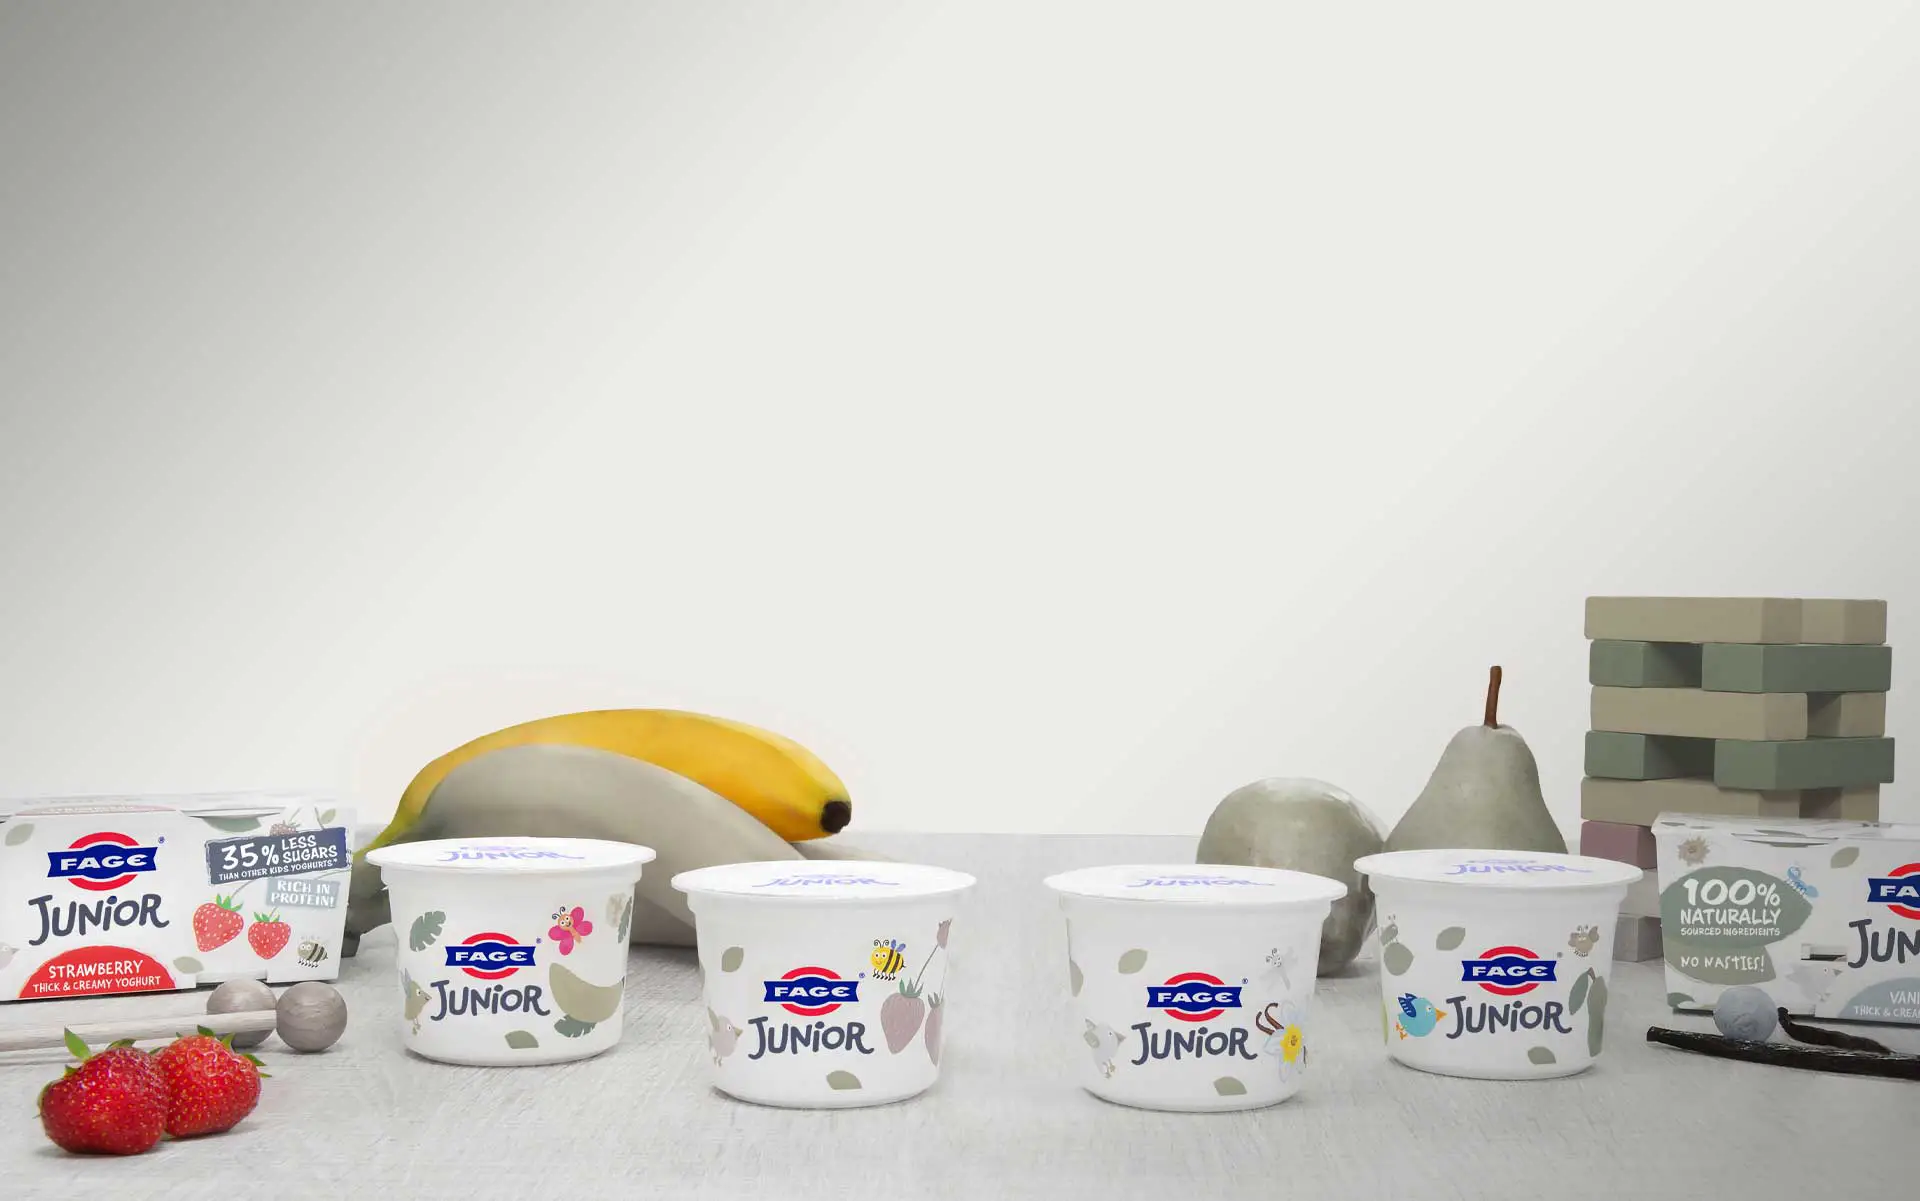 Everyday with FAGE yoghurt